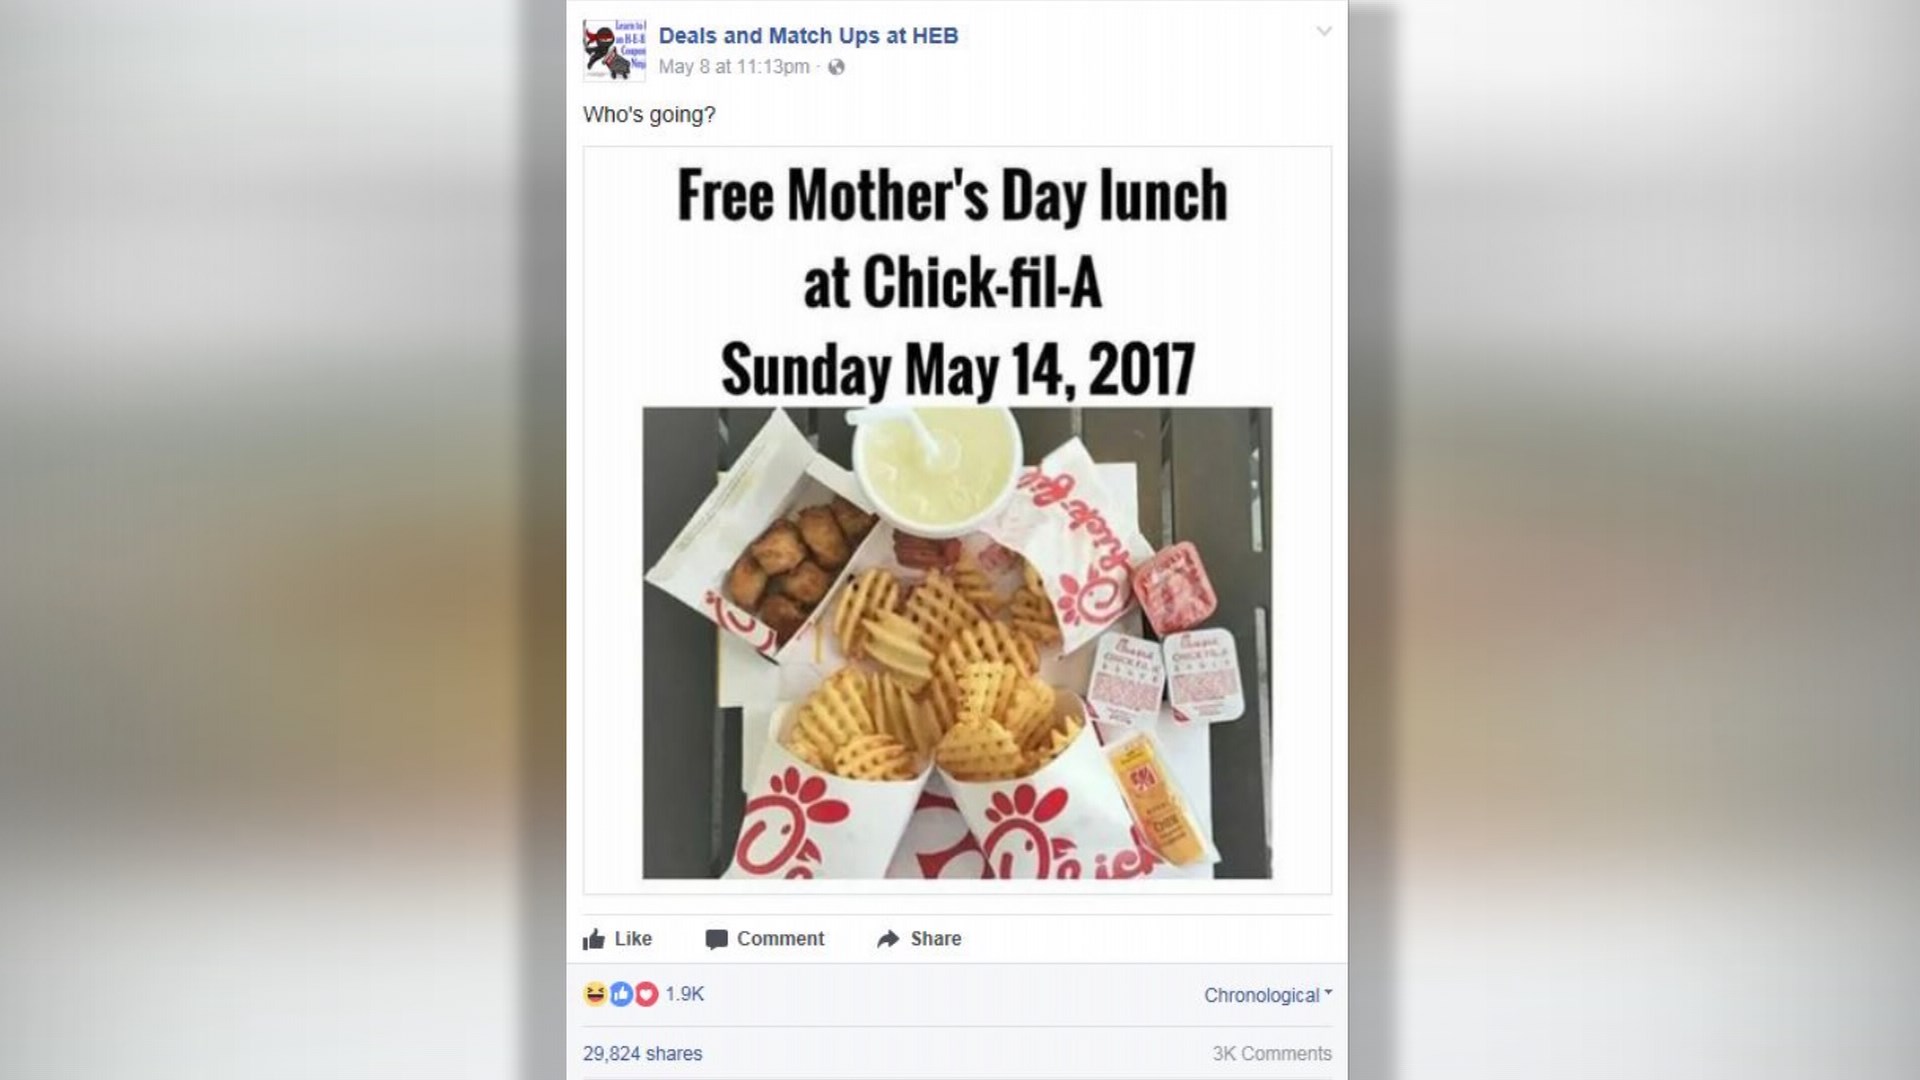 VERIFY Is ChickfilA coupon for free Mother's Day lunch real?